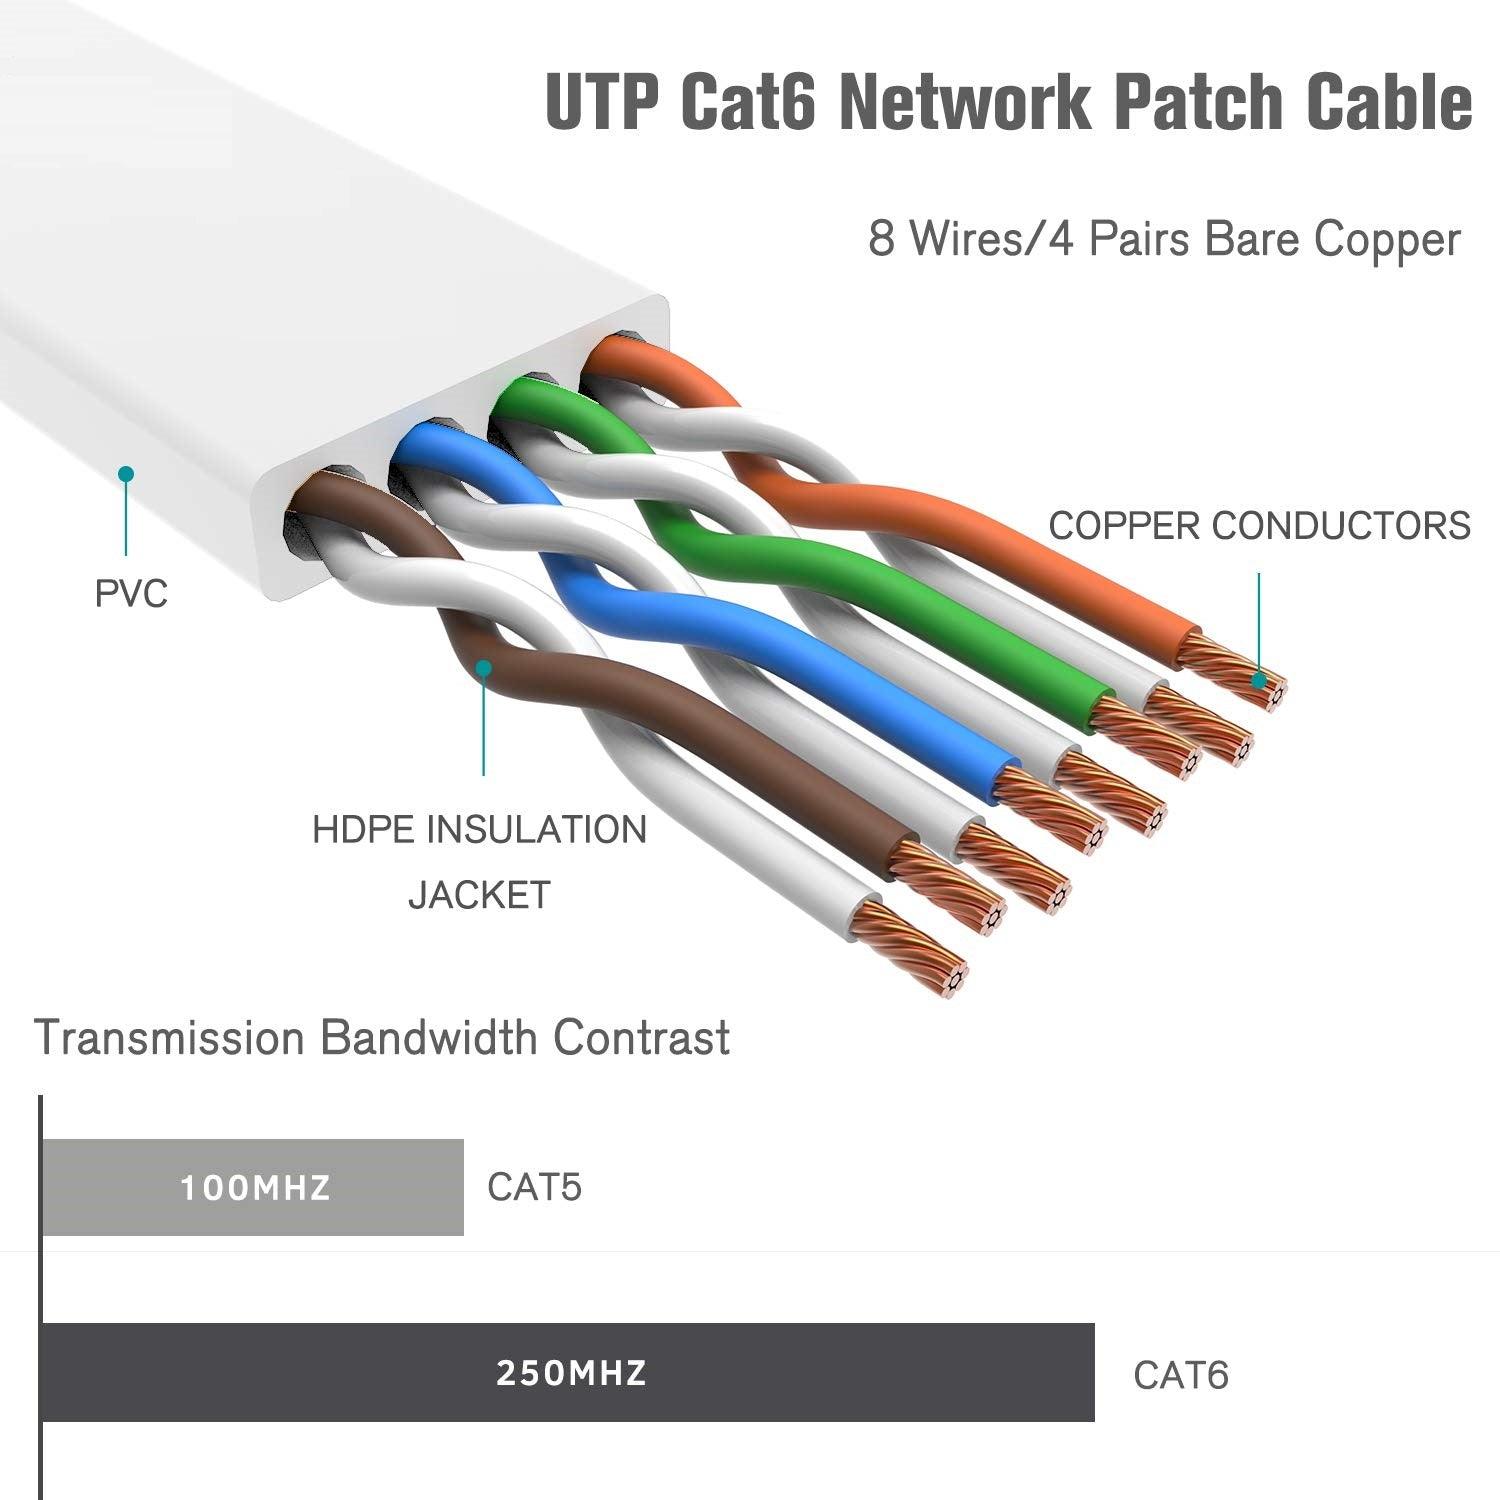 FEDUS Cat6 Ethernet Cable, Flat RJ45 LAN Cable wire High Speed 250MHZ / 1 Gigabit Speed UTP LAN Cable, Network Internet Cable, Patch Computer Cord Gigabit Category 6 Wires for Modem, Router - FEDUS